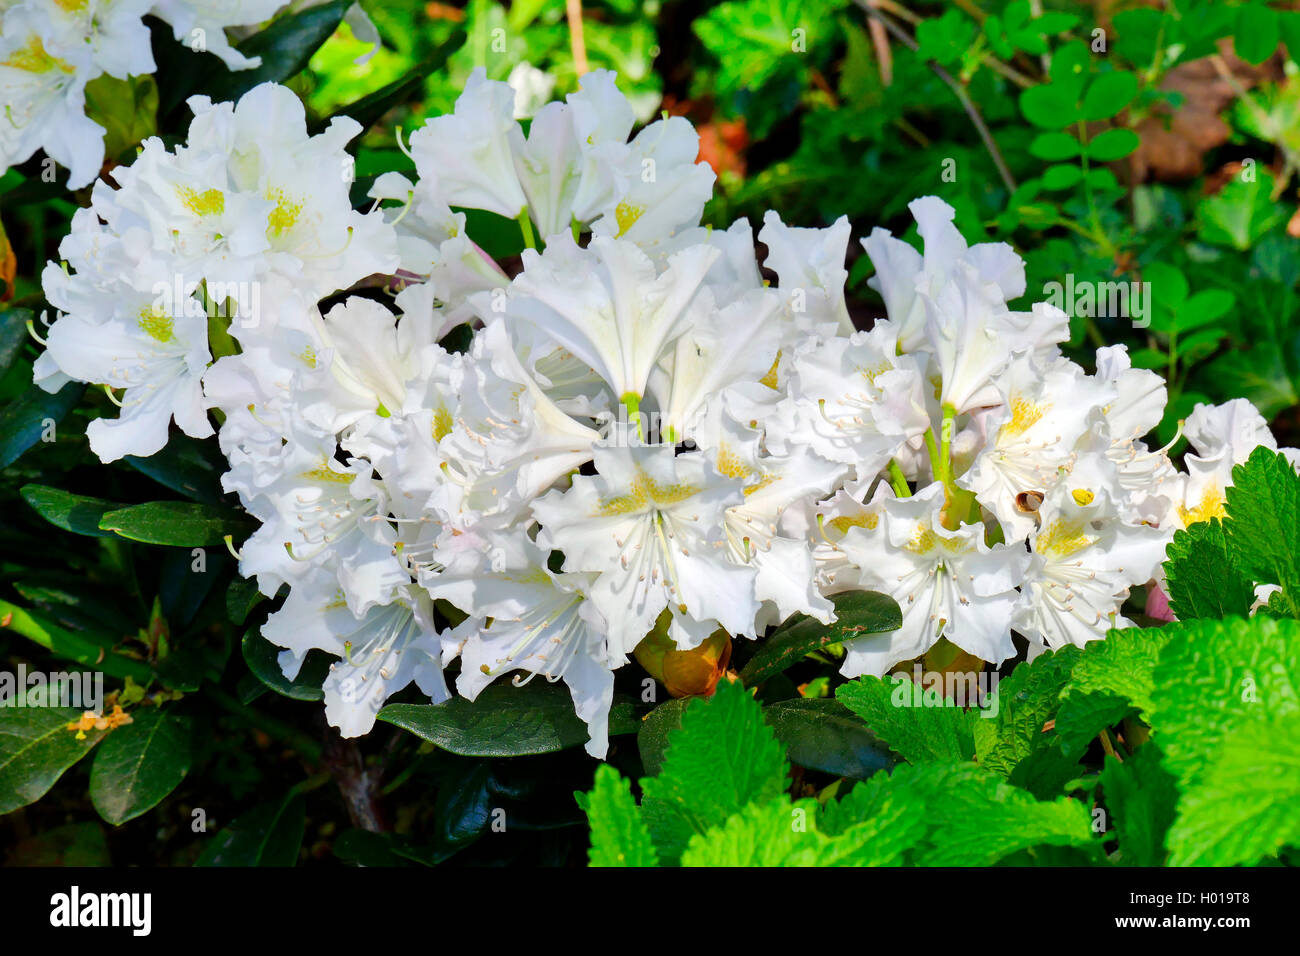 rhododendron (Rhododendron 'Cunningham White', Rhododendron Cunningham White), cultivar Cunningham White Stock Photo